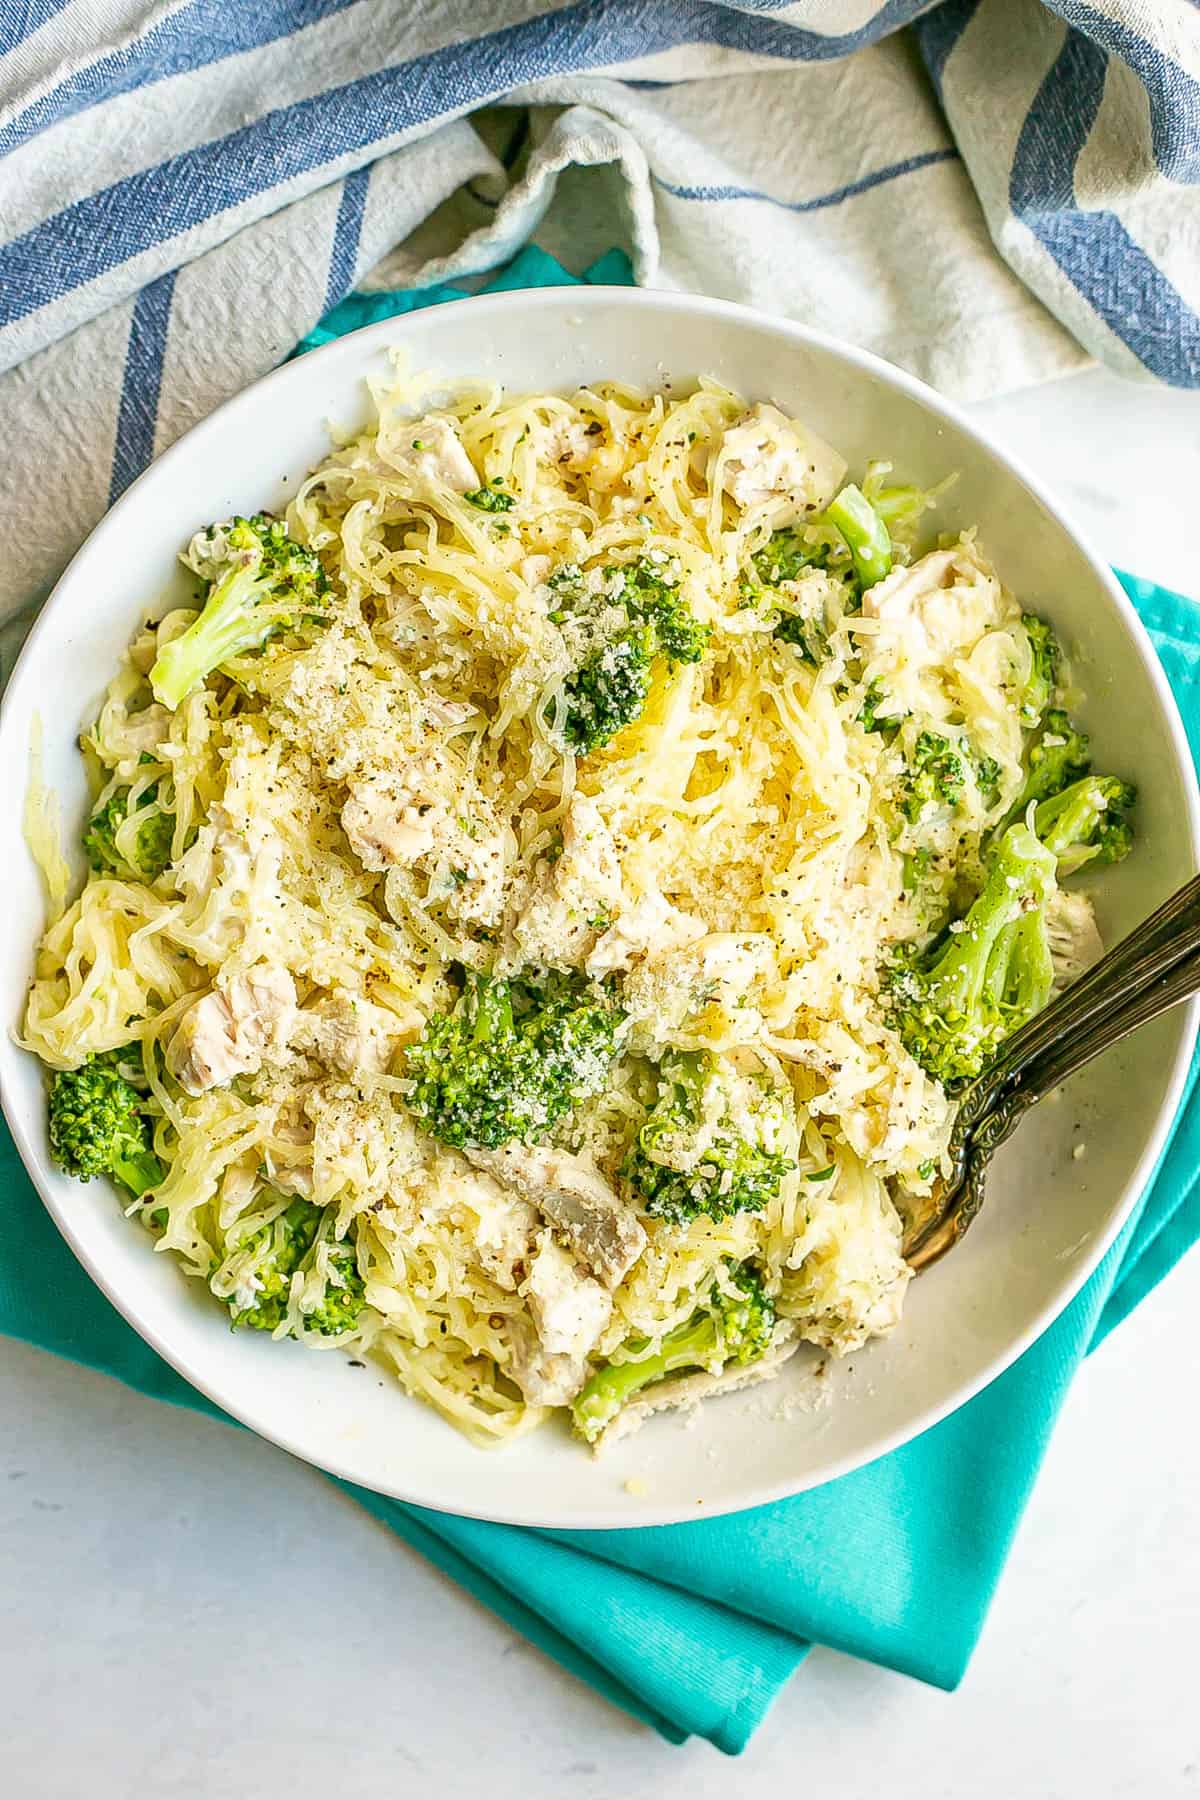 Spaghetti squash with chicken and broccoli served in a low white bowl with two forks resting in it.